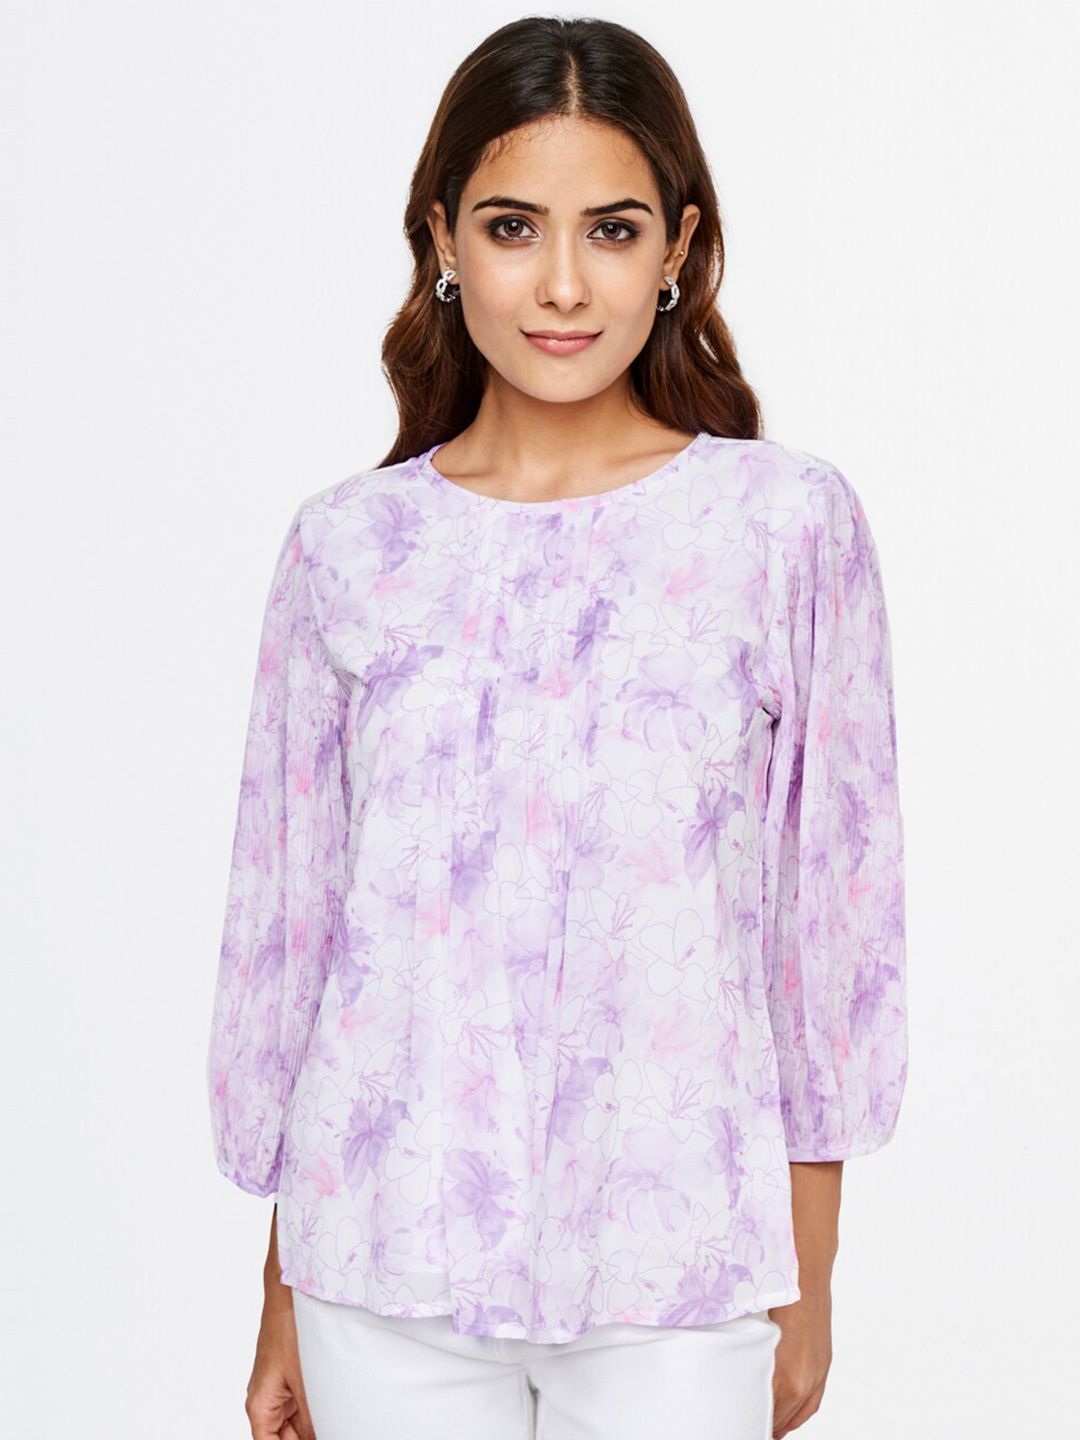 AND Purple & White Floral Print Top Price in India